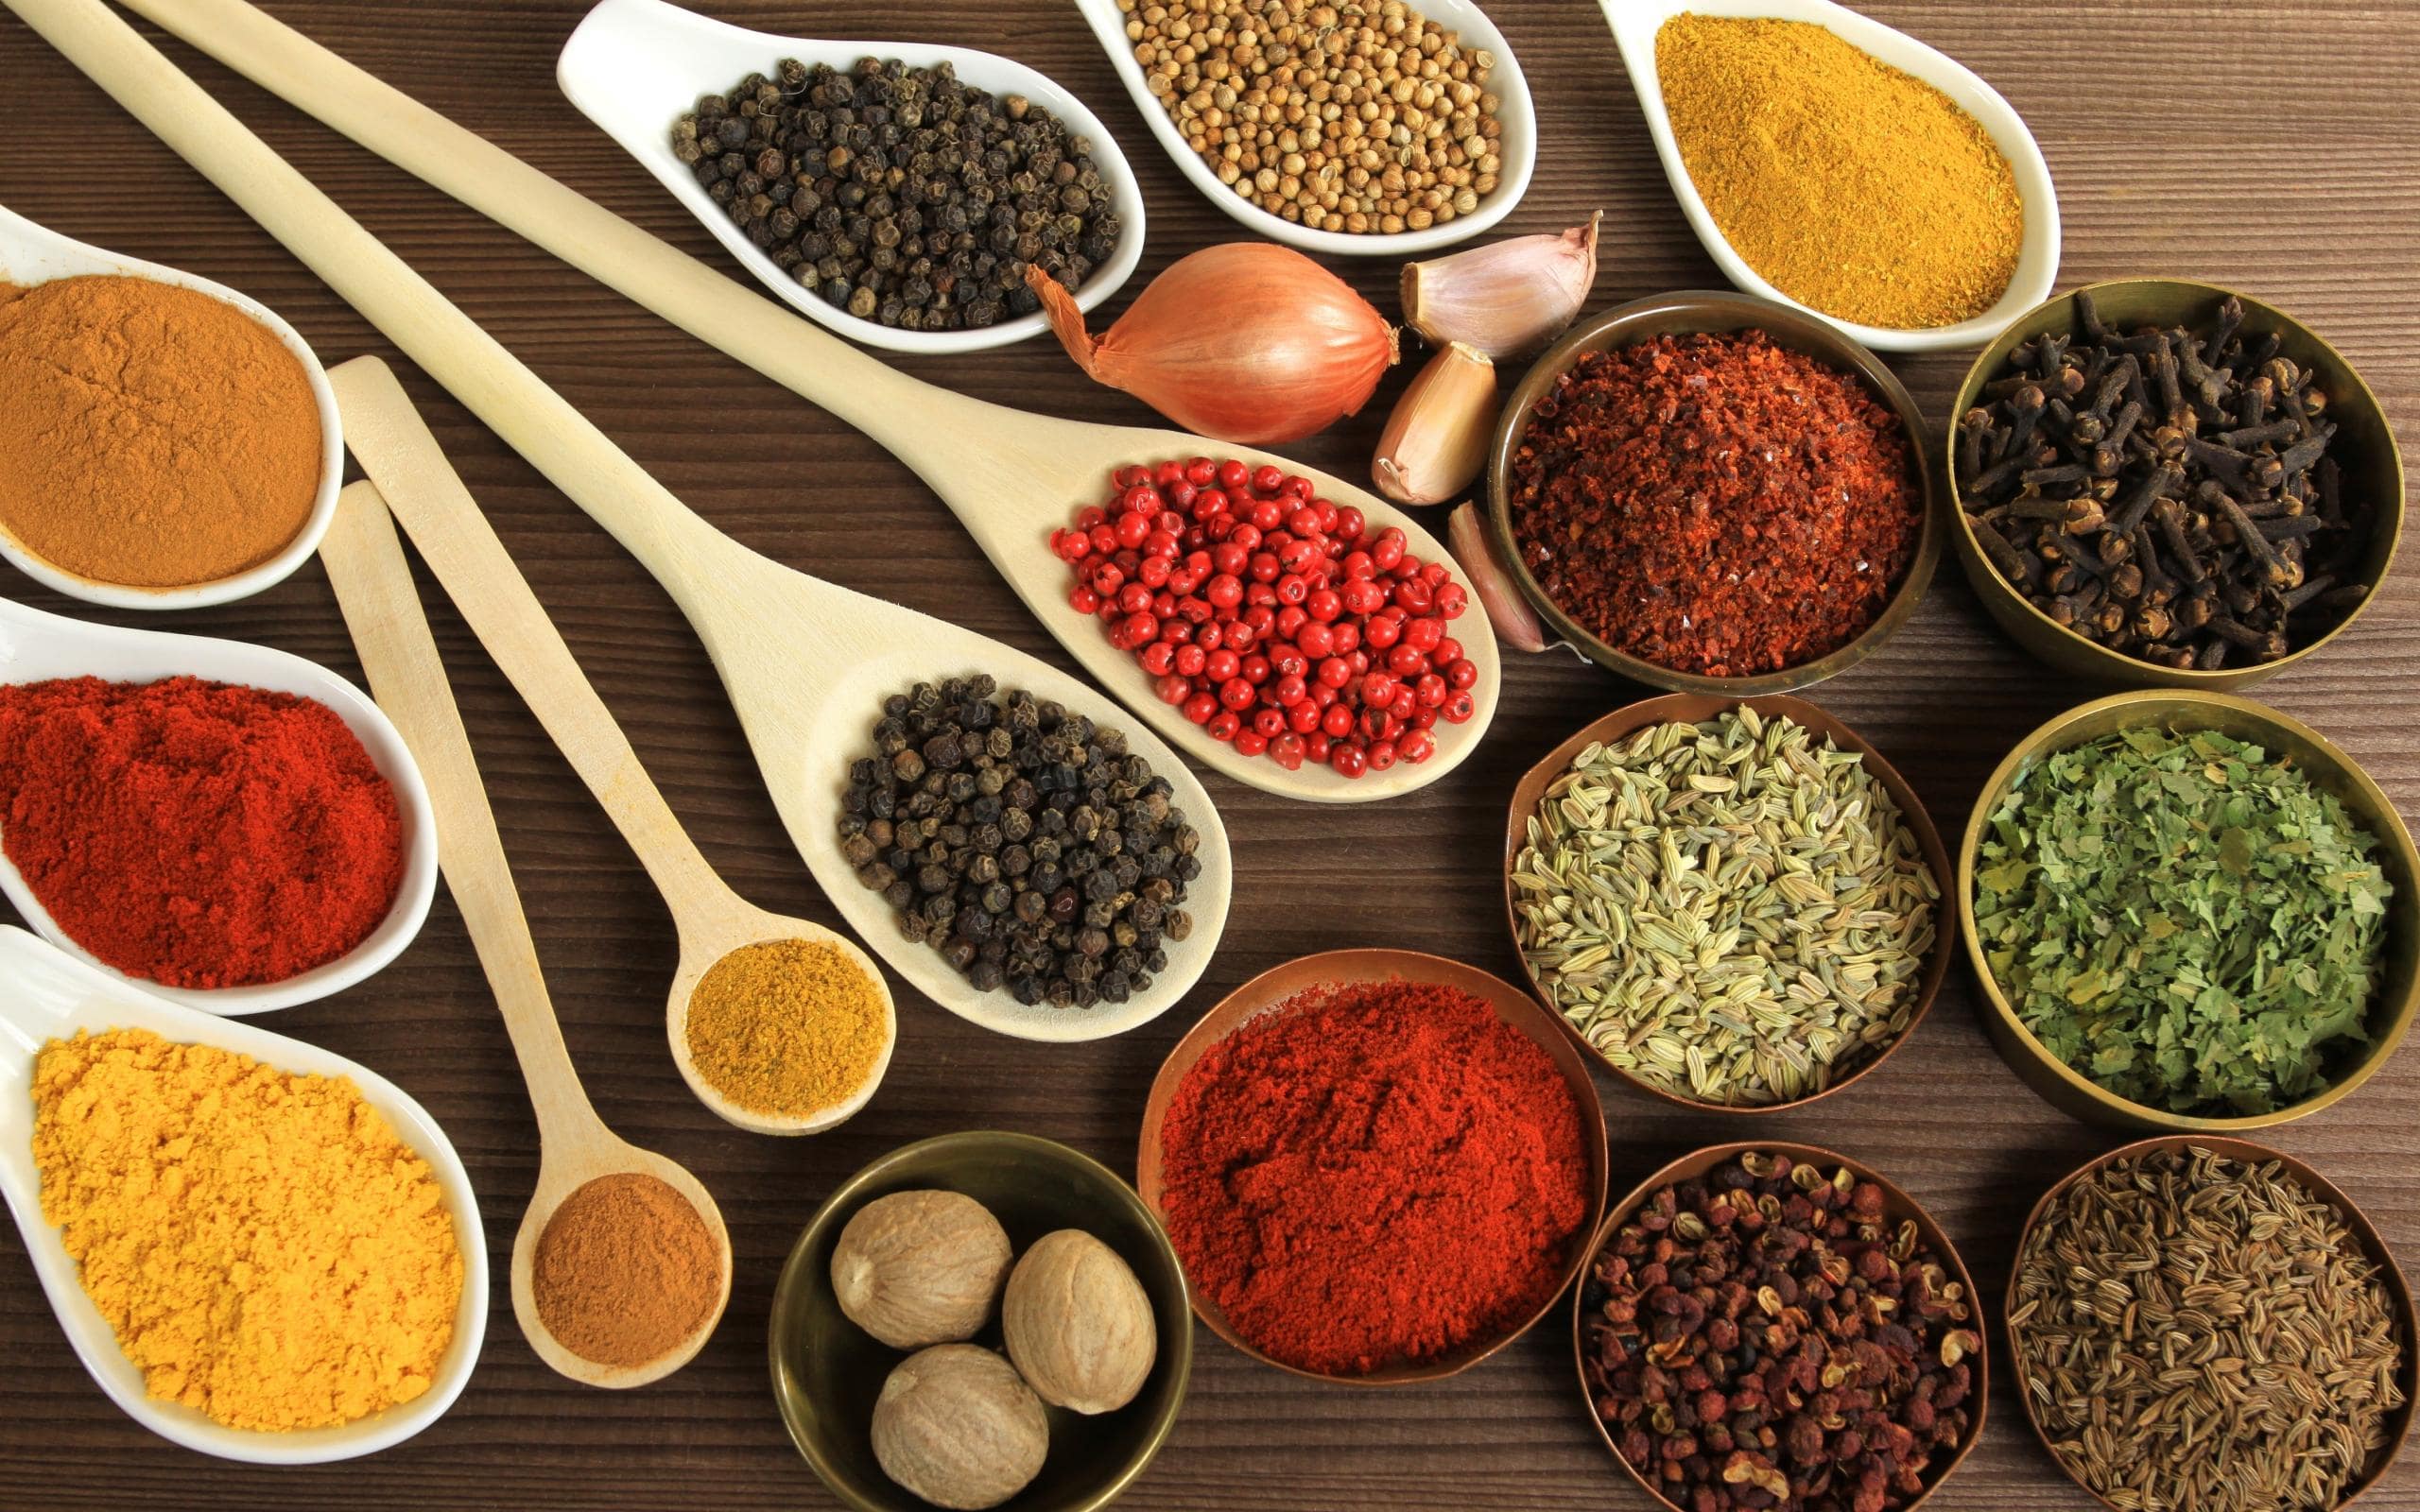 Top 10 Best Masala Spices Brands in India